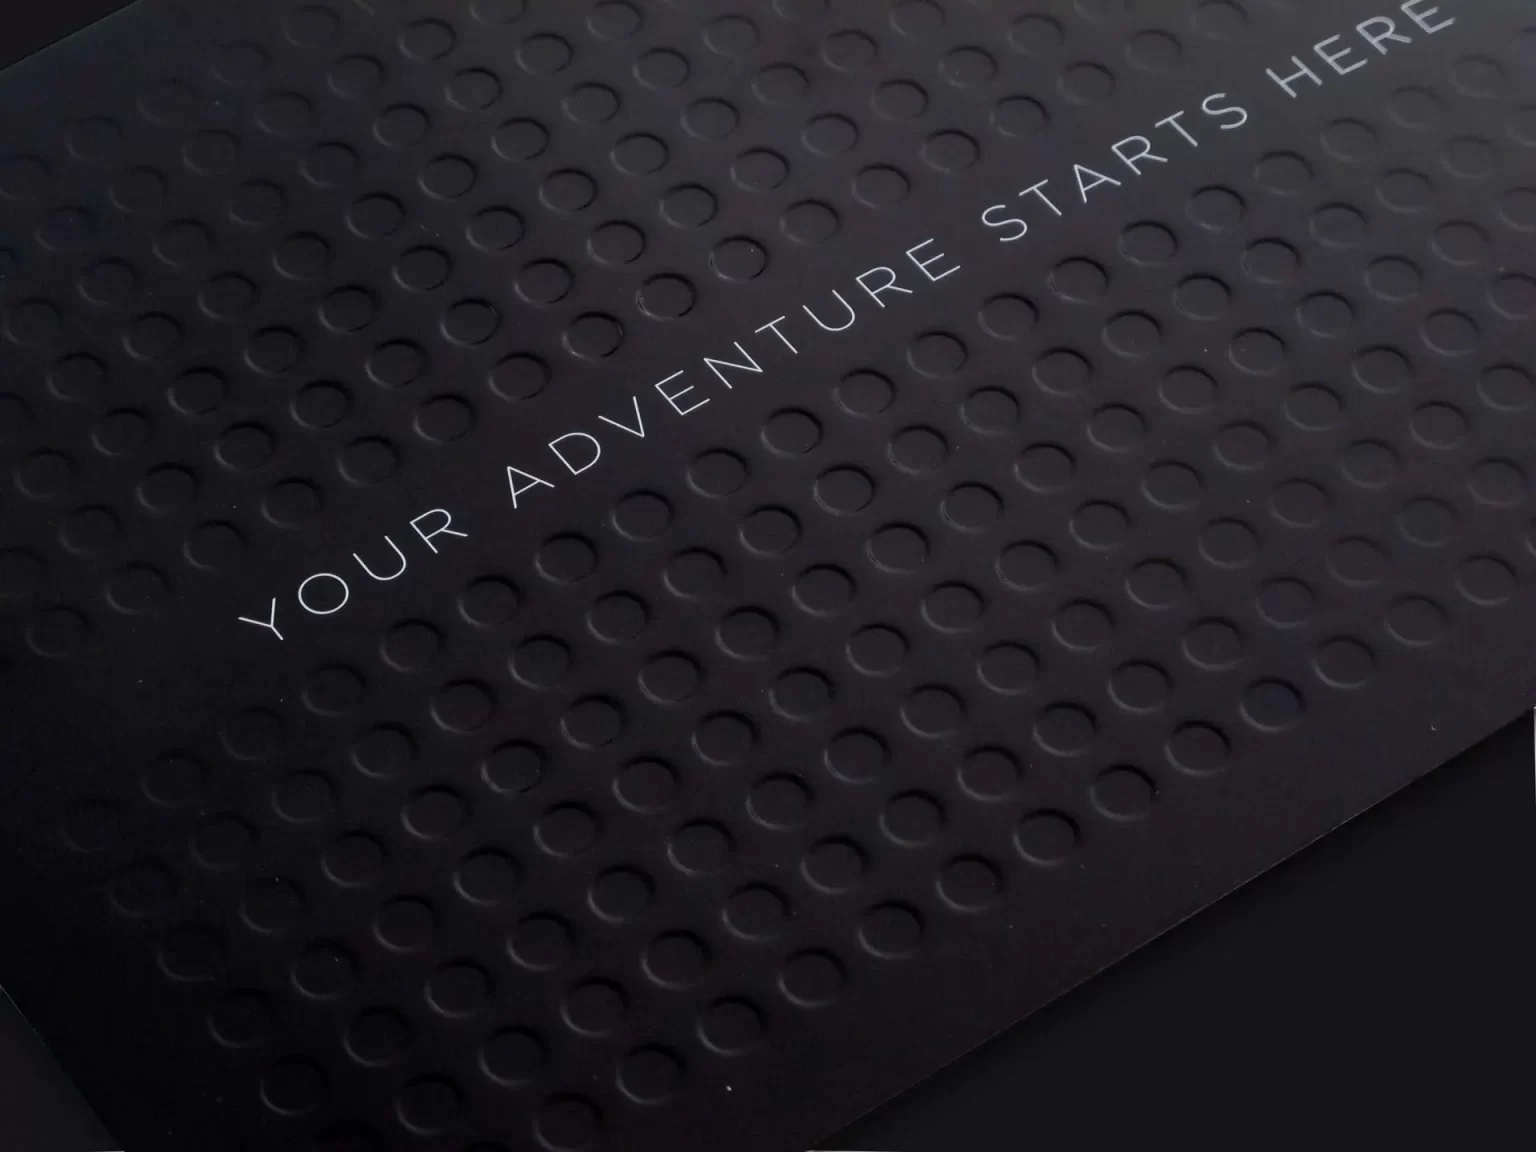 Close-up of a black textured surface with embossed circular patterns and the text "YOUR ADVENTURE STARTS HERE" printed in white.